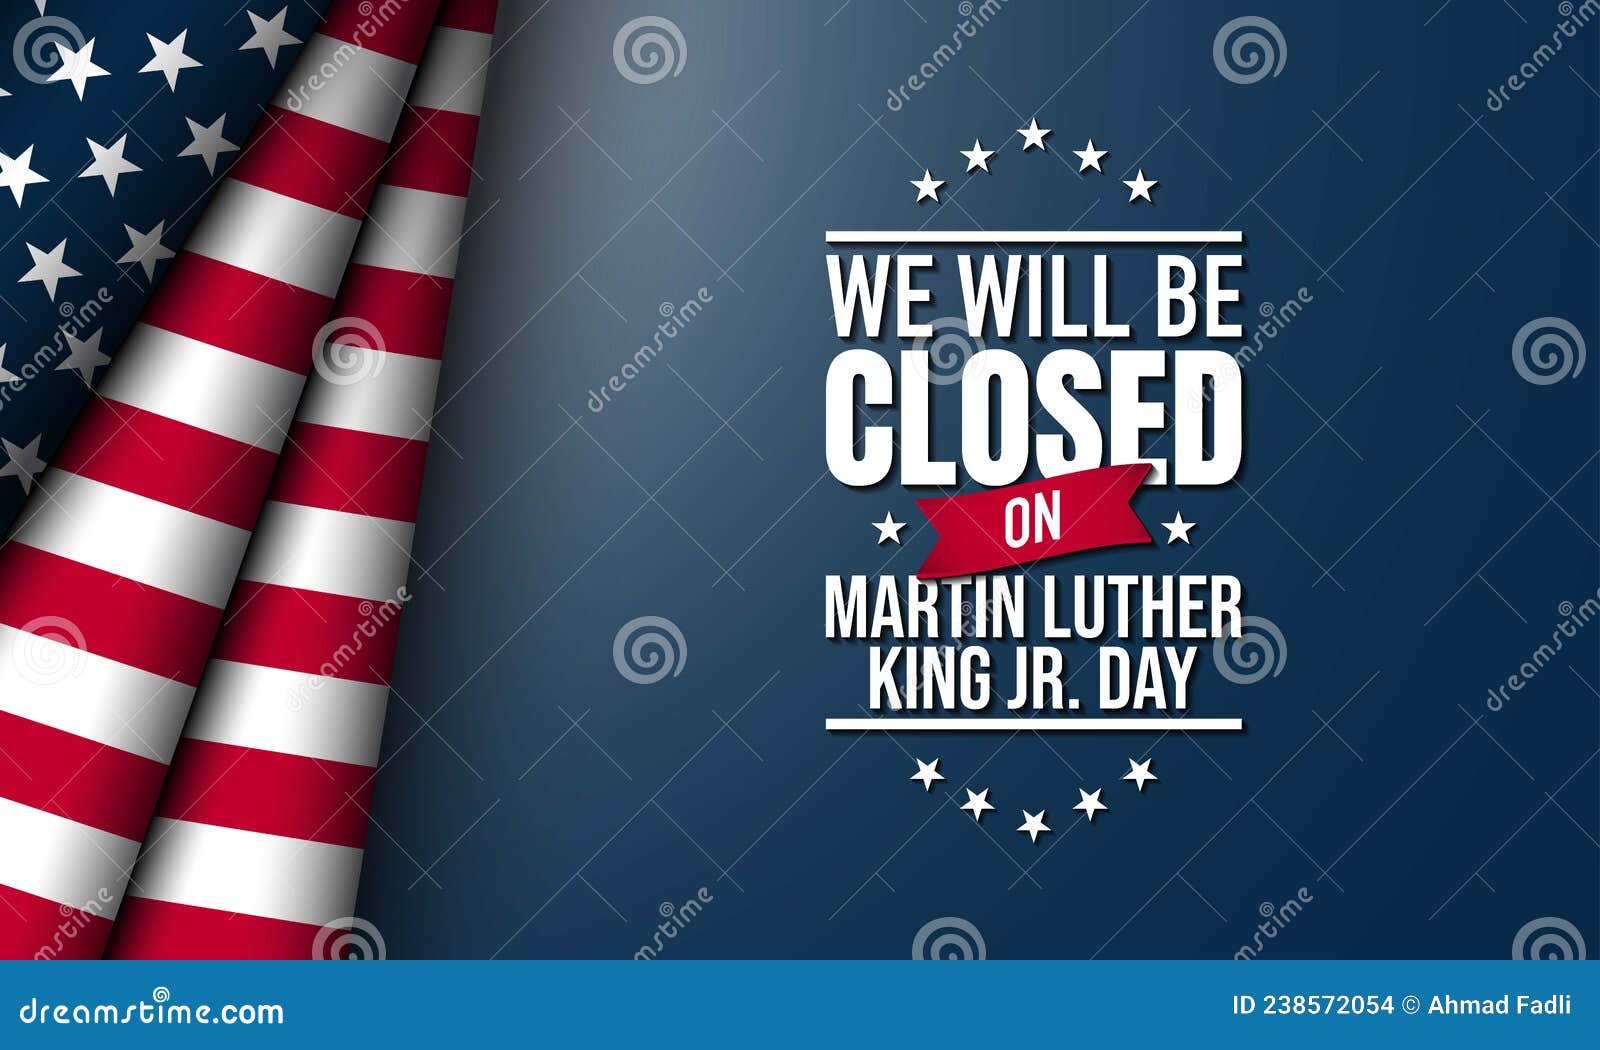 Martin Luther King Jr. Day Background Design. we Will Be Closed on